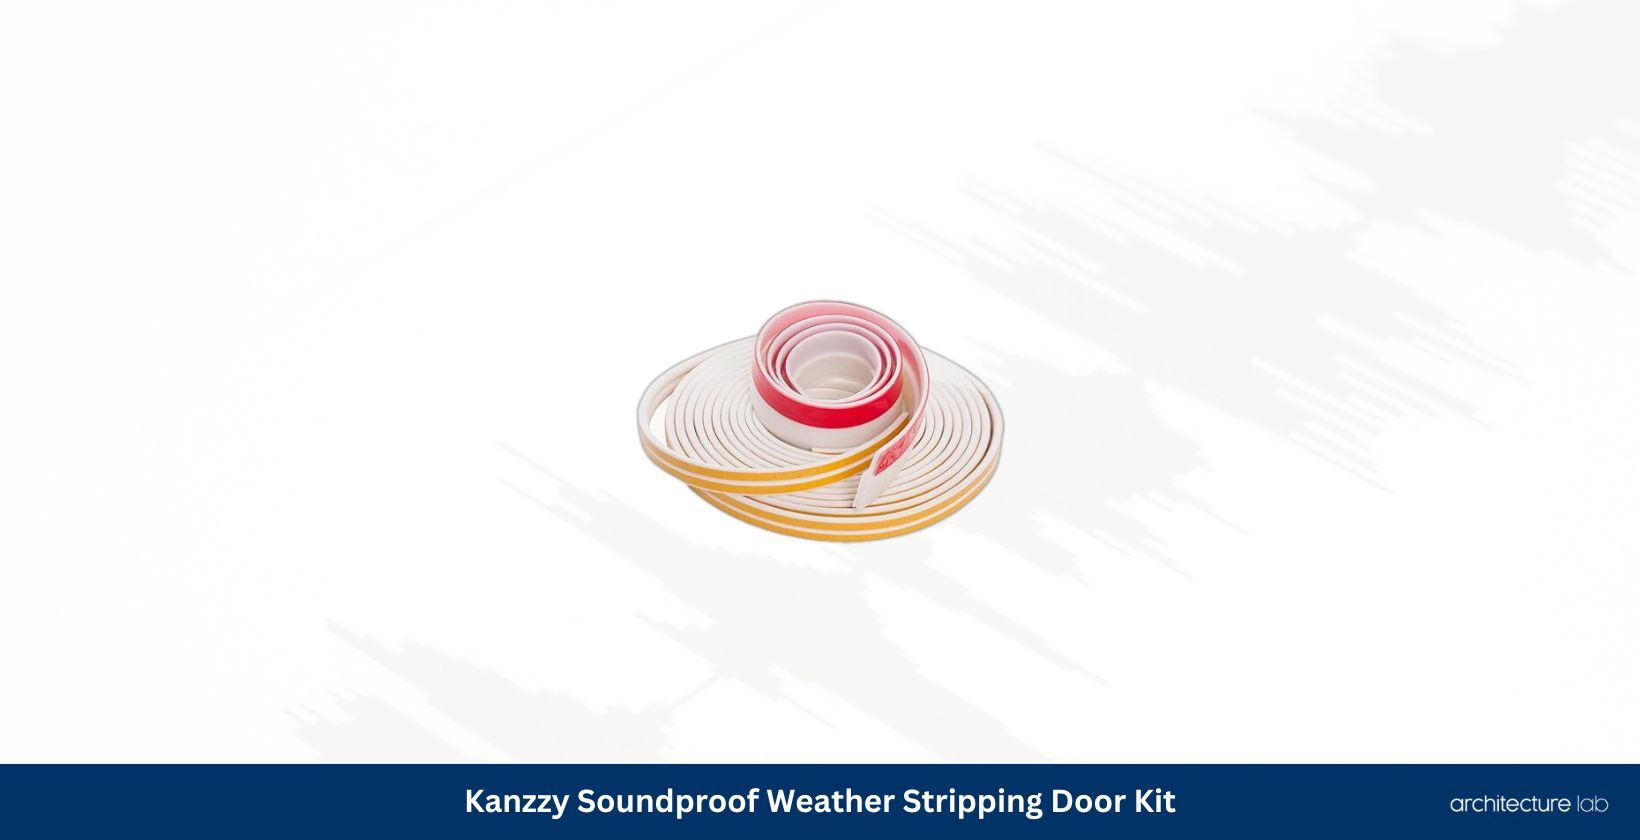 Kanzzy soundproof weather stripping door kit